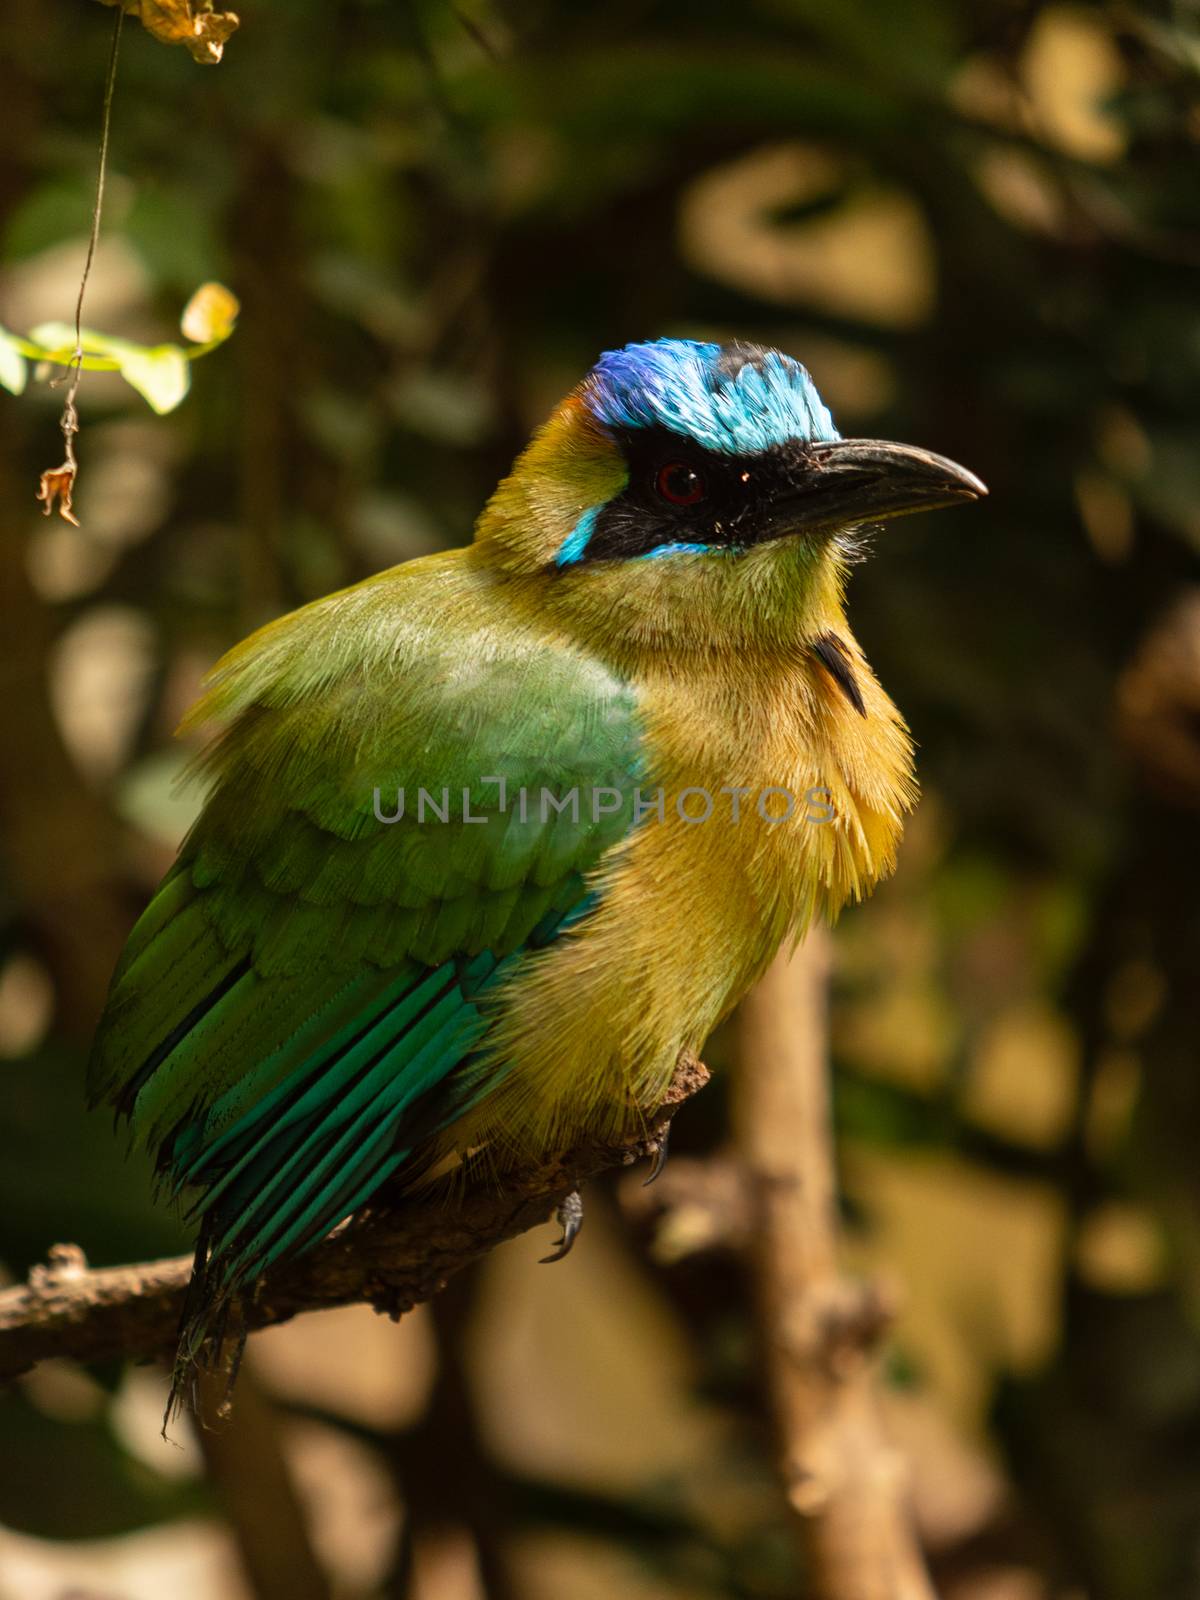 Bee eater bird perched on a branch, naturalistic image of tropical bird